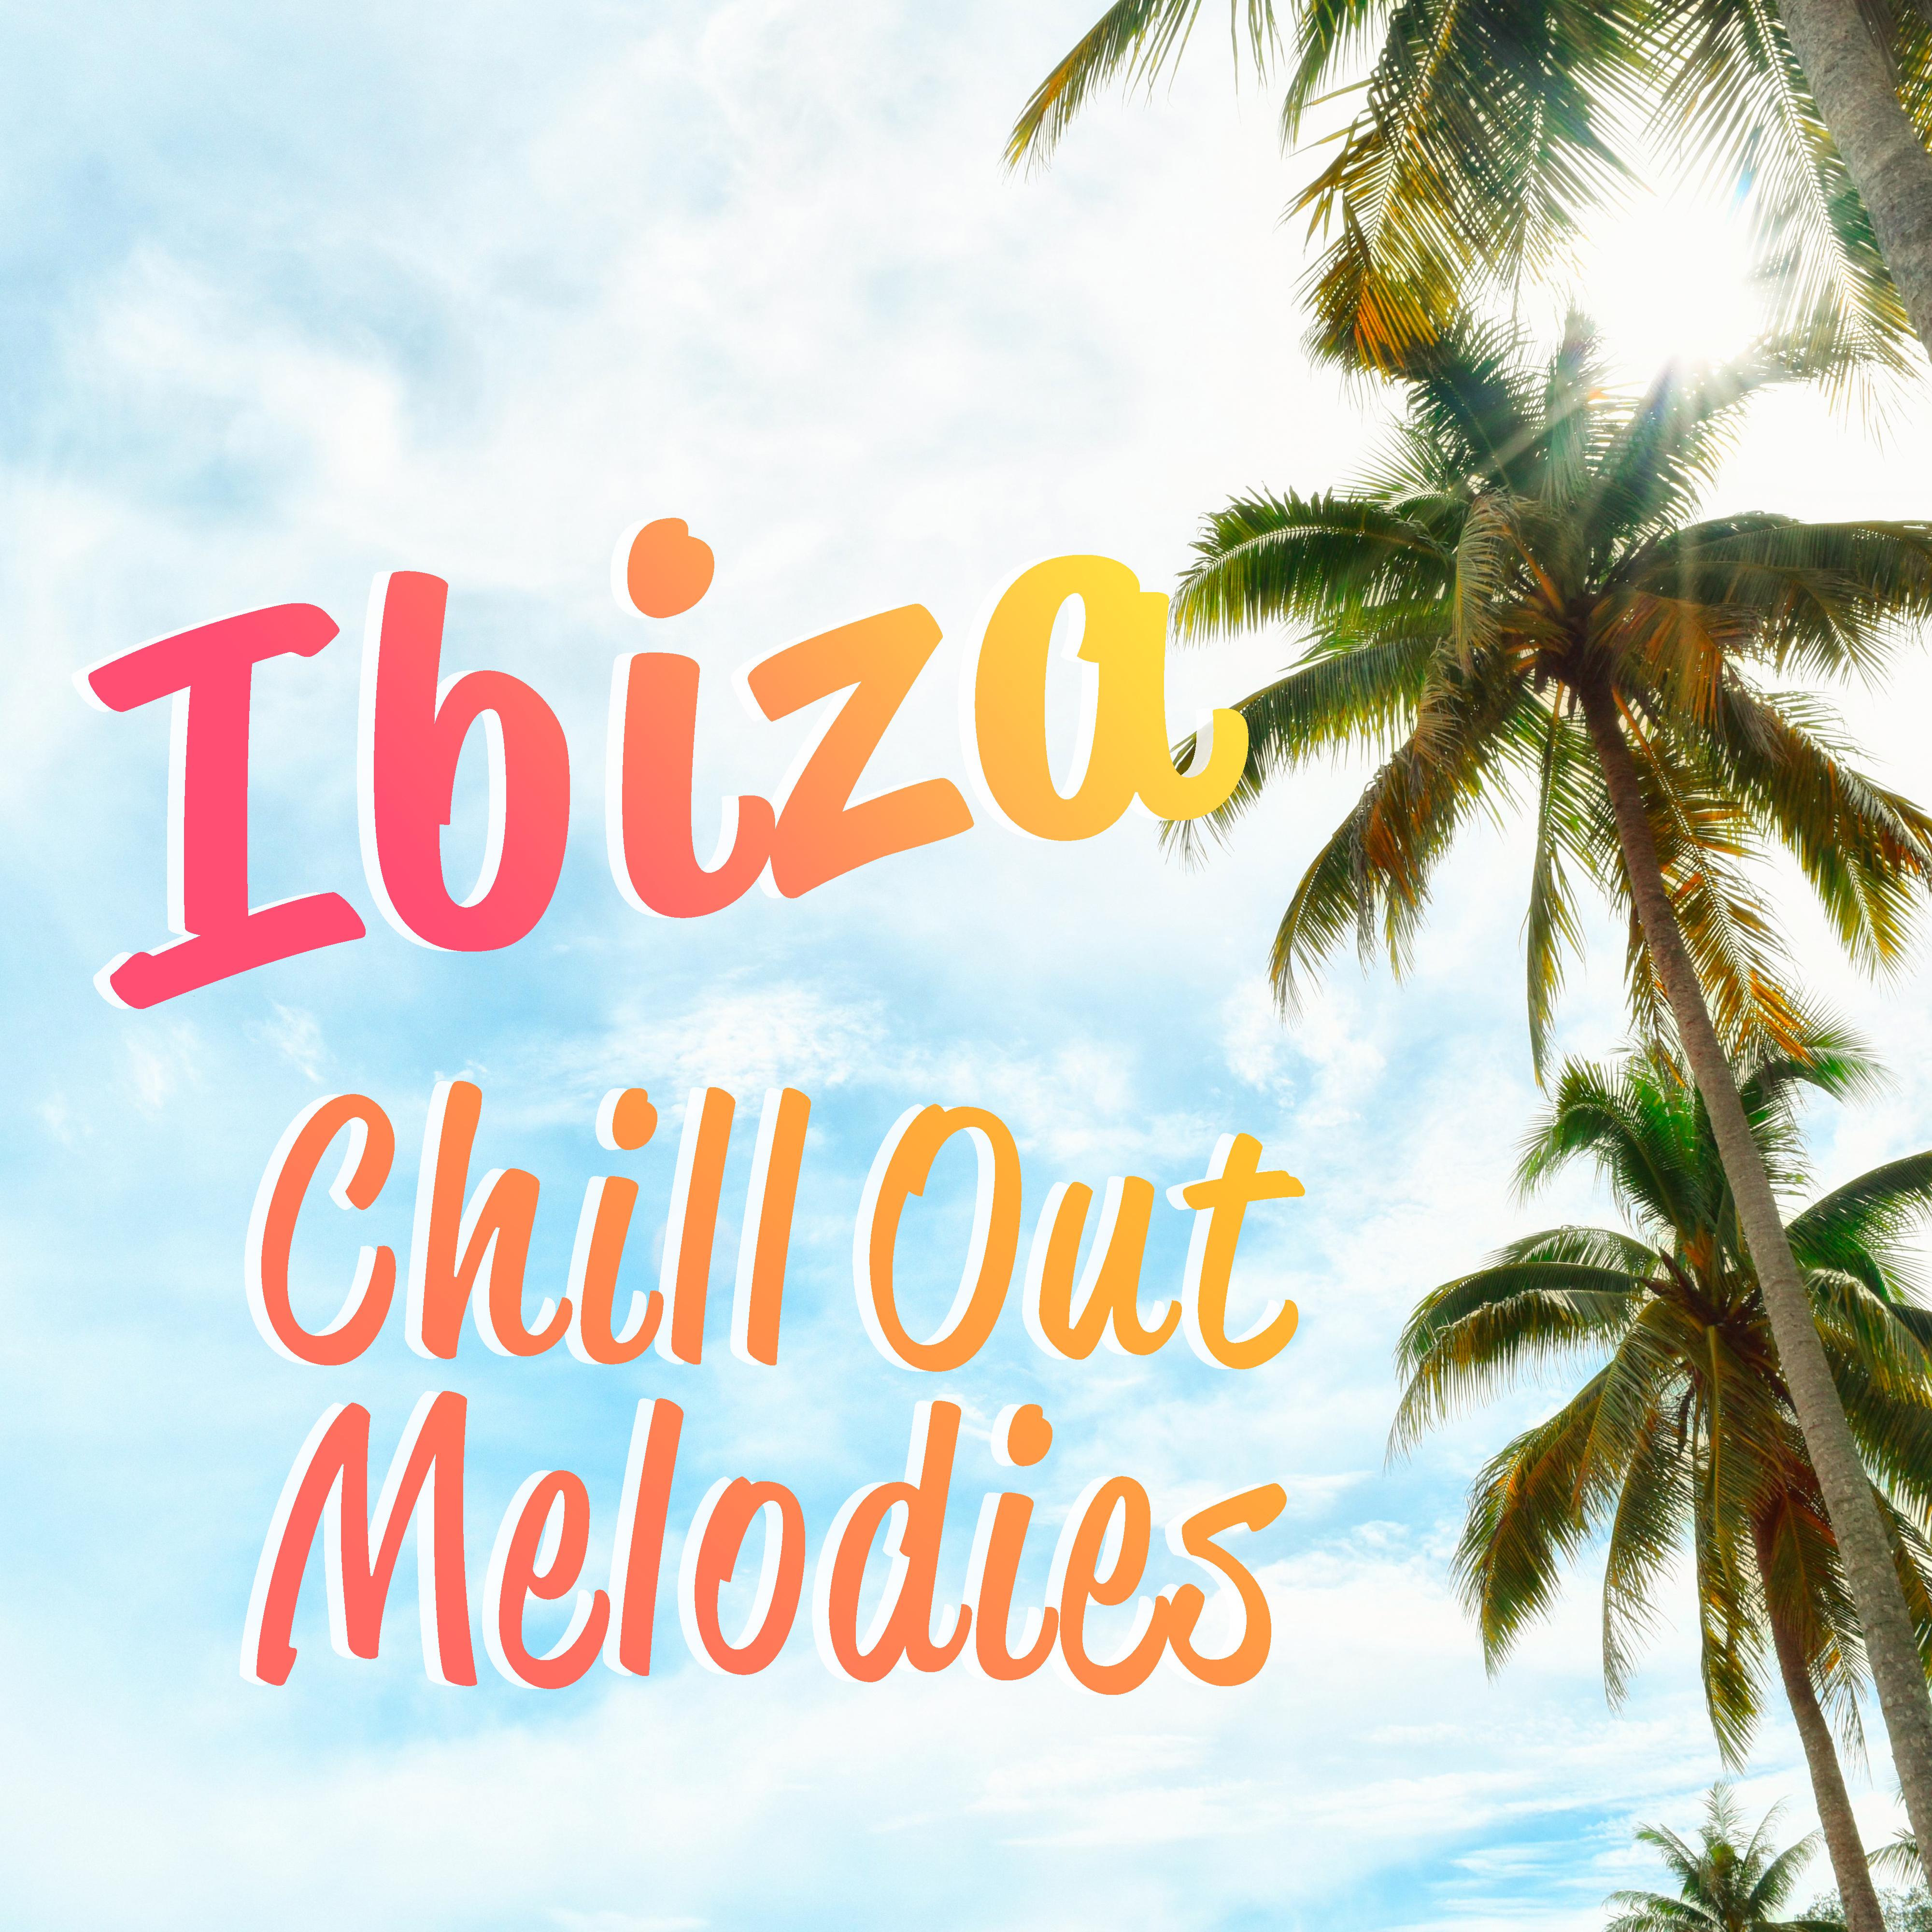 Ibiza Chill Out Melodies – Calming Chill Out, Summer 2017, Beach Lounge, Beautiful Holiday Memories